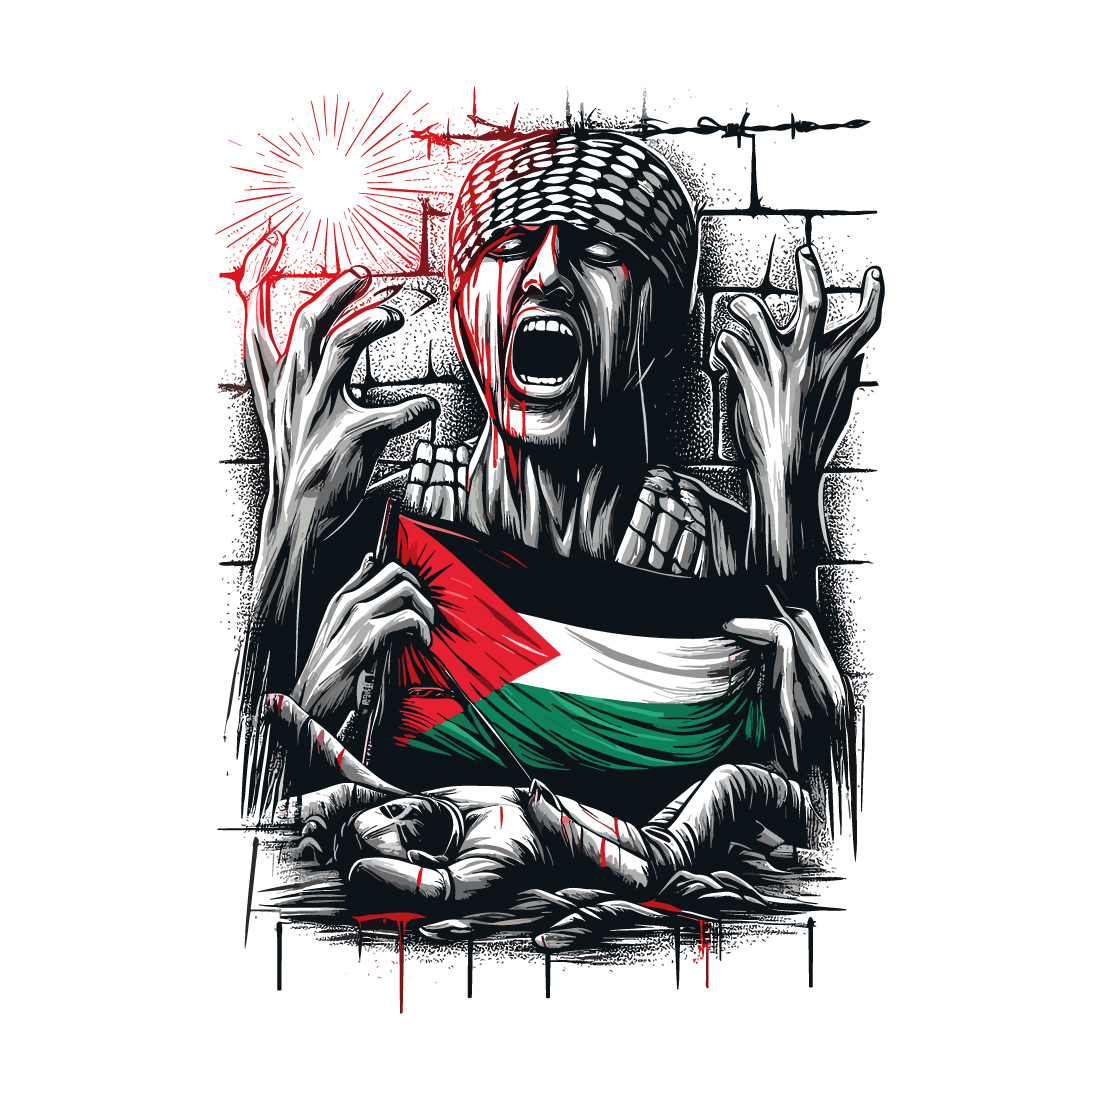 t-shirt depicting the suffering and struggle of Palestine with letter or flag on white background cover image.